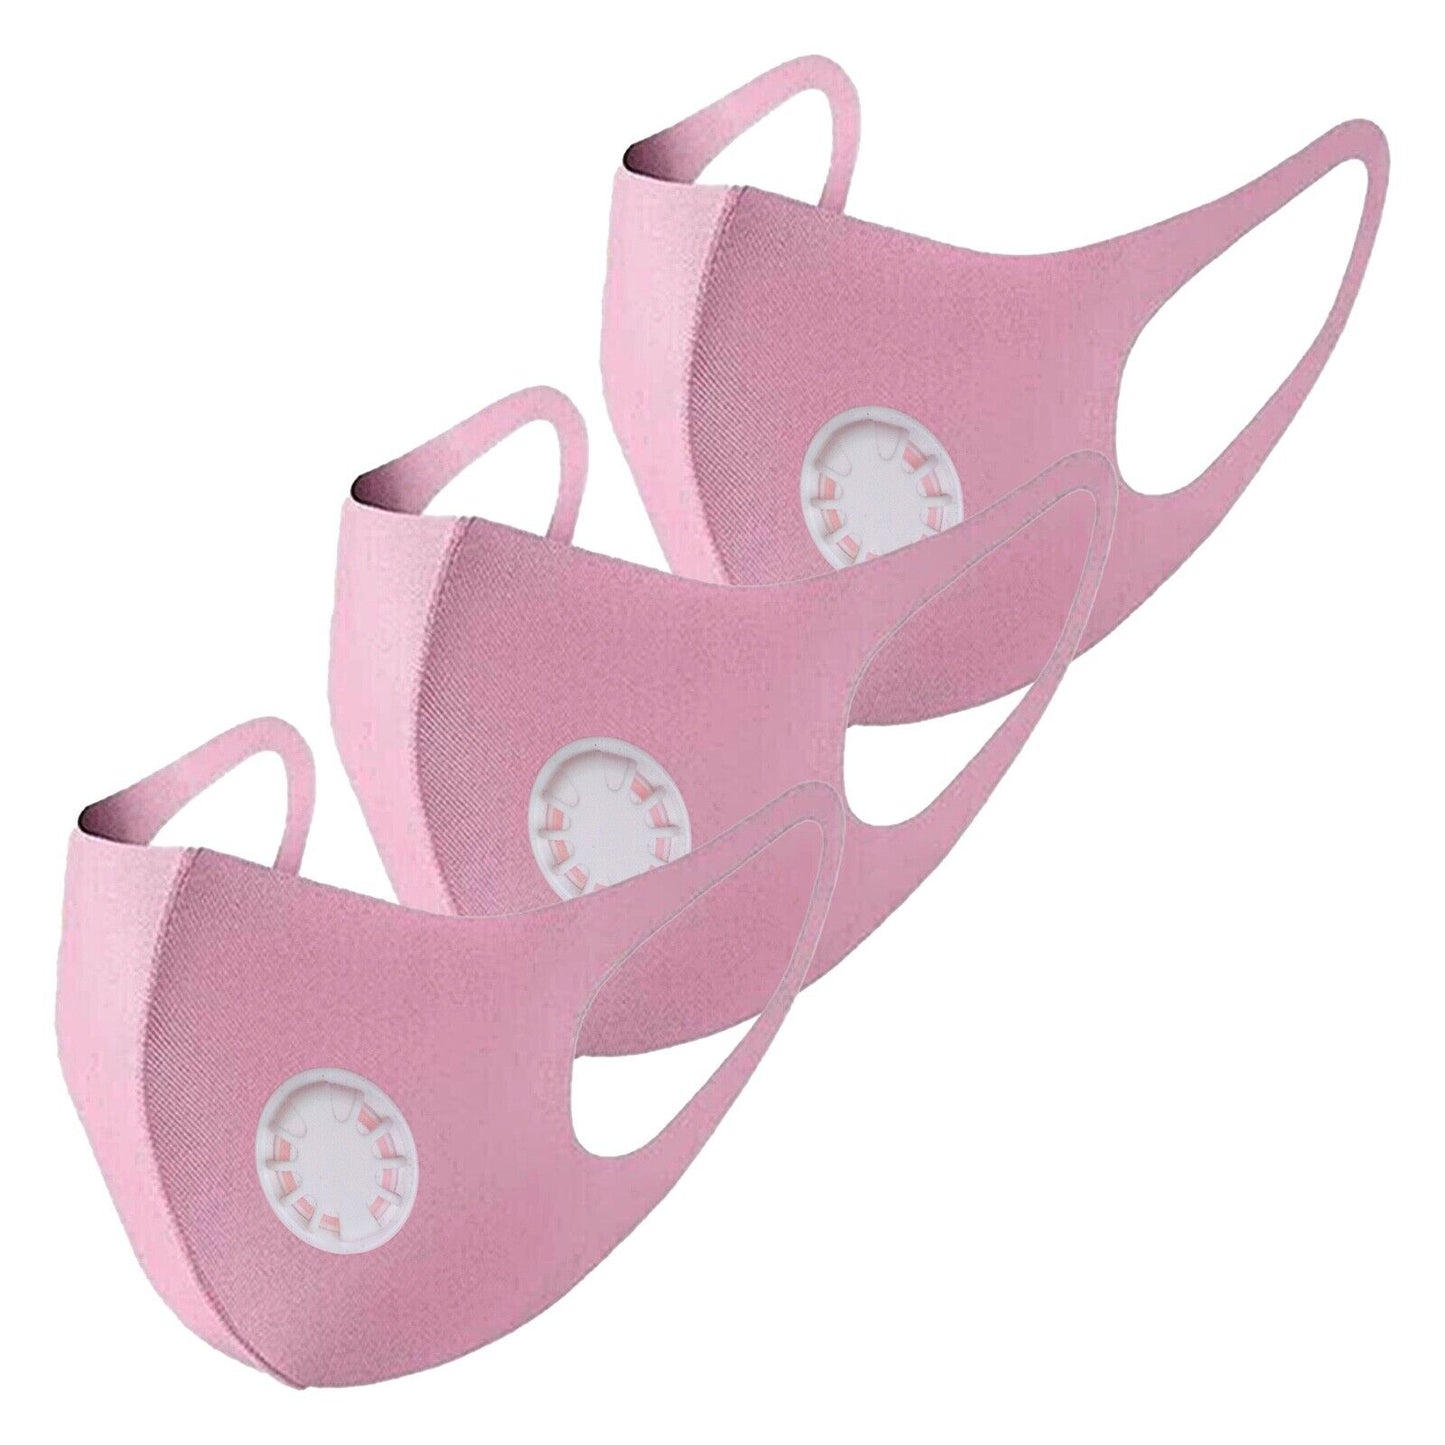 3x ProTech NonMedical PROTECTIVE MASKS Machine Washable Reusable PINK w/FILTER